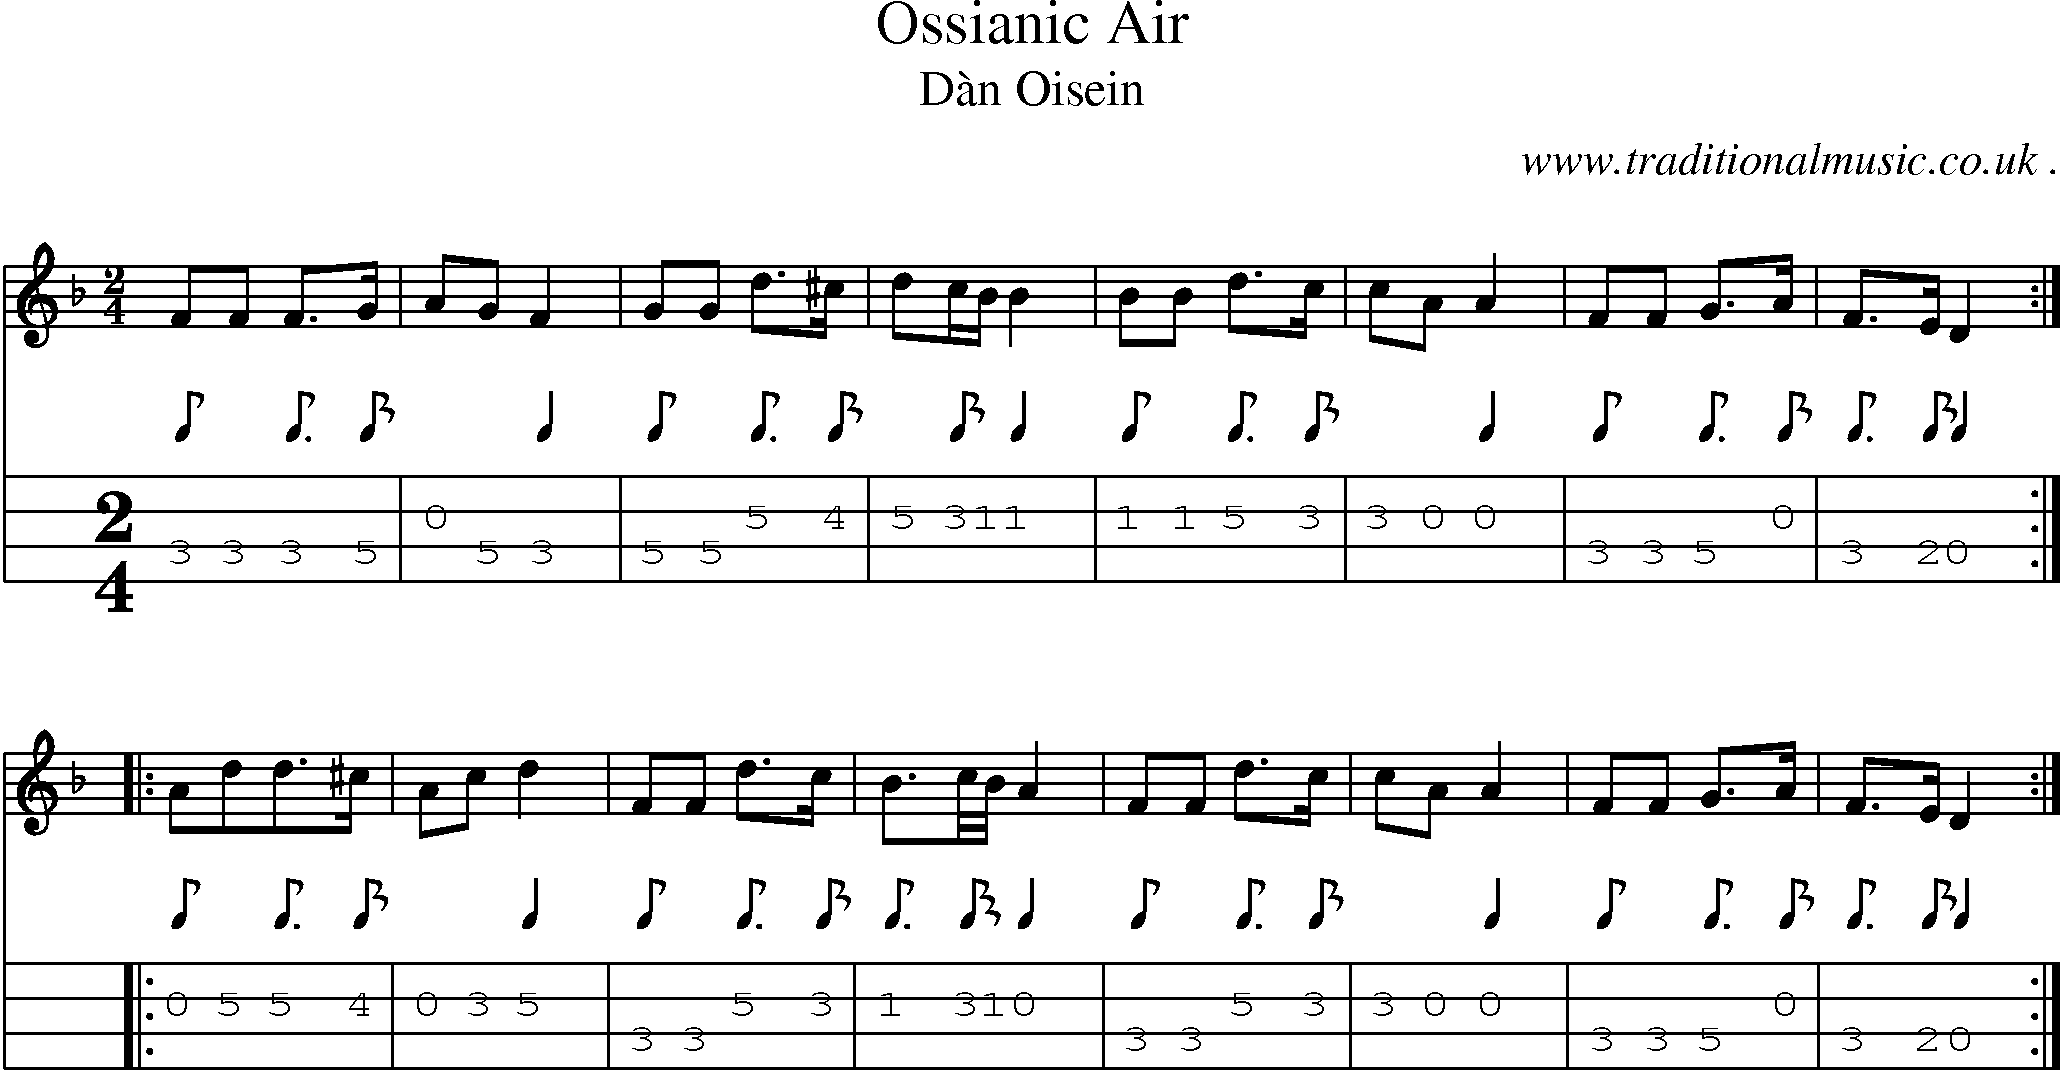 Sheet-music  score, Chords and Mandolin Tabs for Ossianic Air